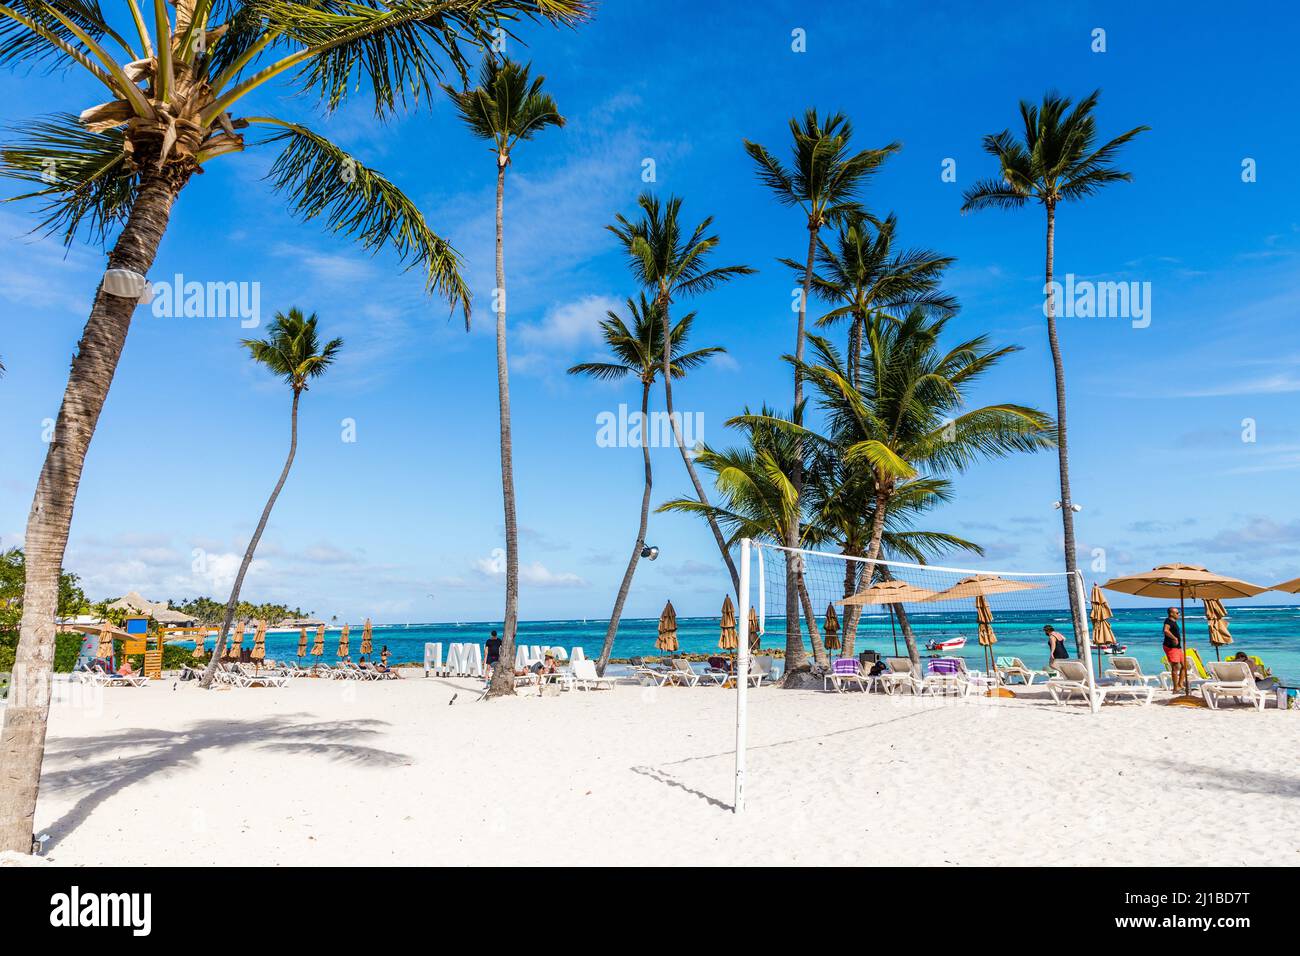 ILLUSTRATION OF THE DECLINE IN THE NUMBER OF RESORT BOOKINGS, THE BEACH AT THE WESTIN PUNTA CANA RESORT & CLUB, DOMINICAN REPUBLIC Stock Photo